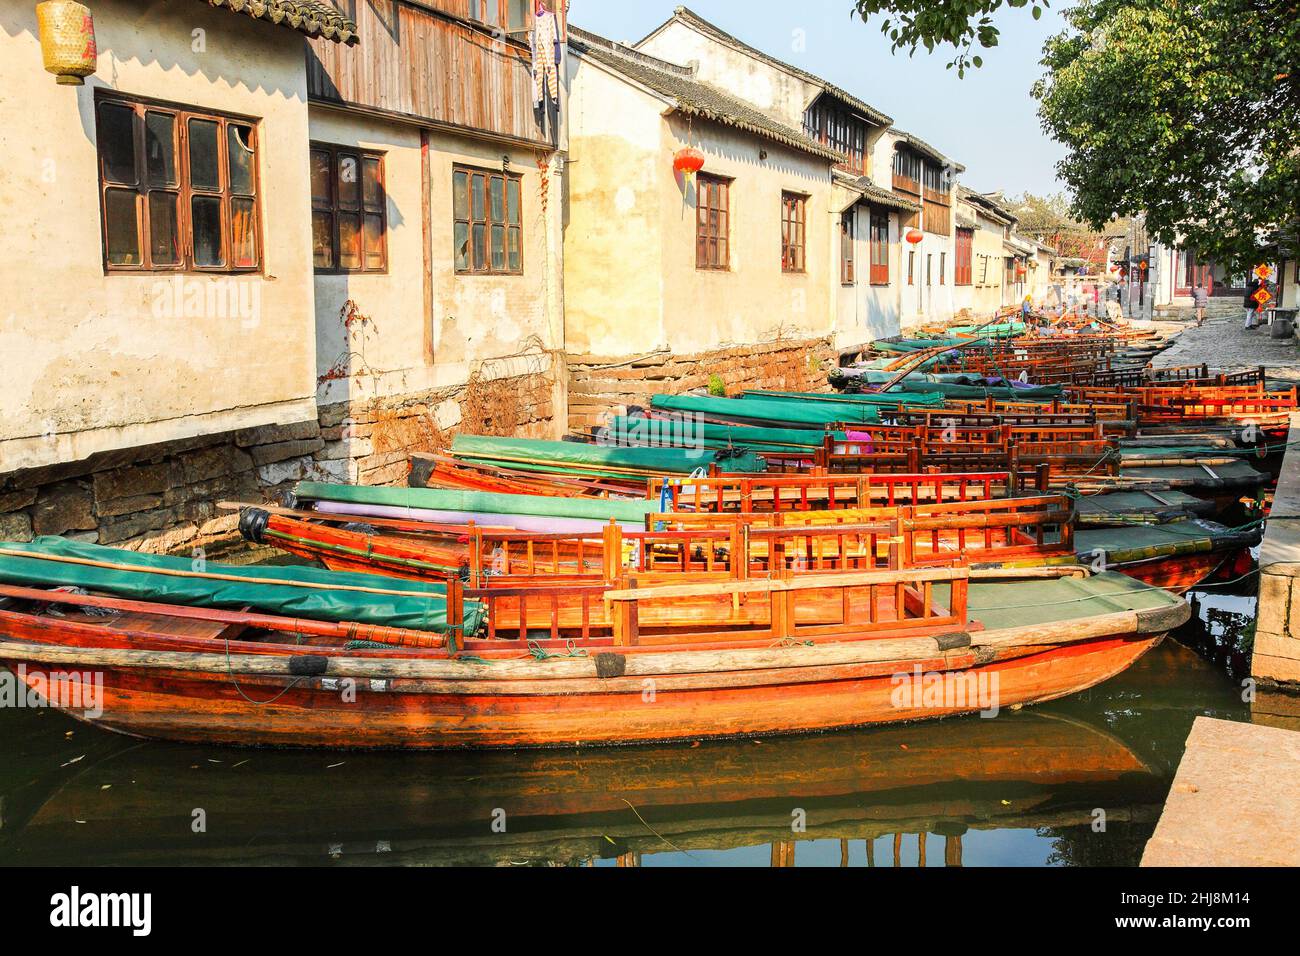 Water taxis waiting for clients on a canal in the water town of Zhouzhuang, China Stock Photo